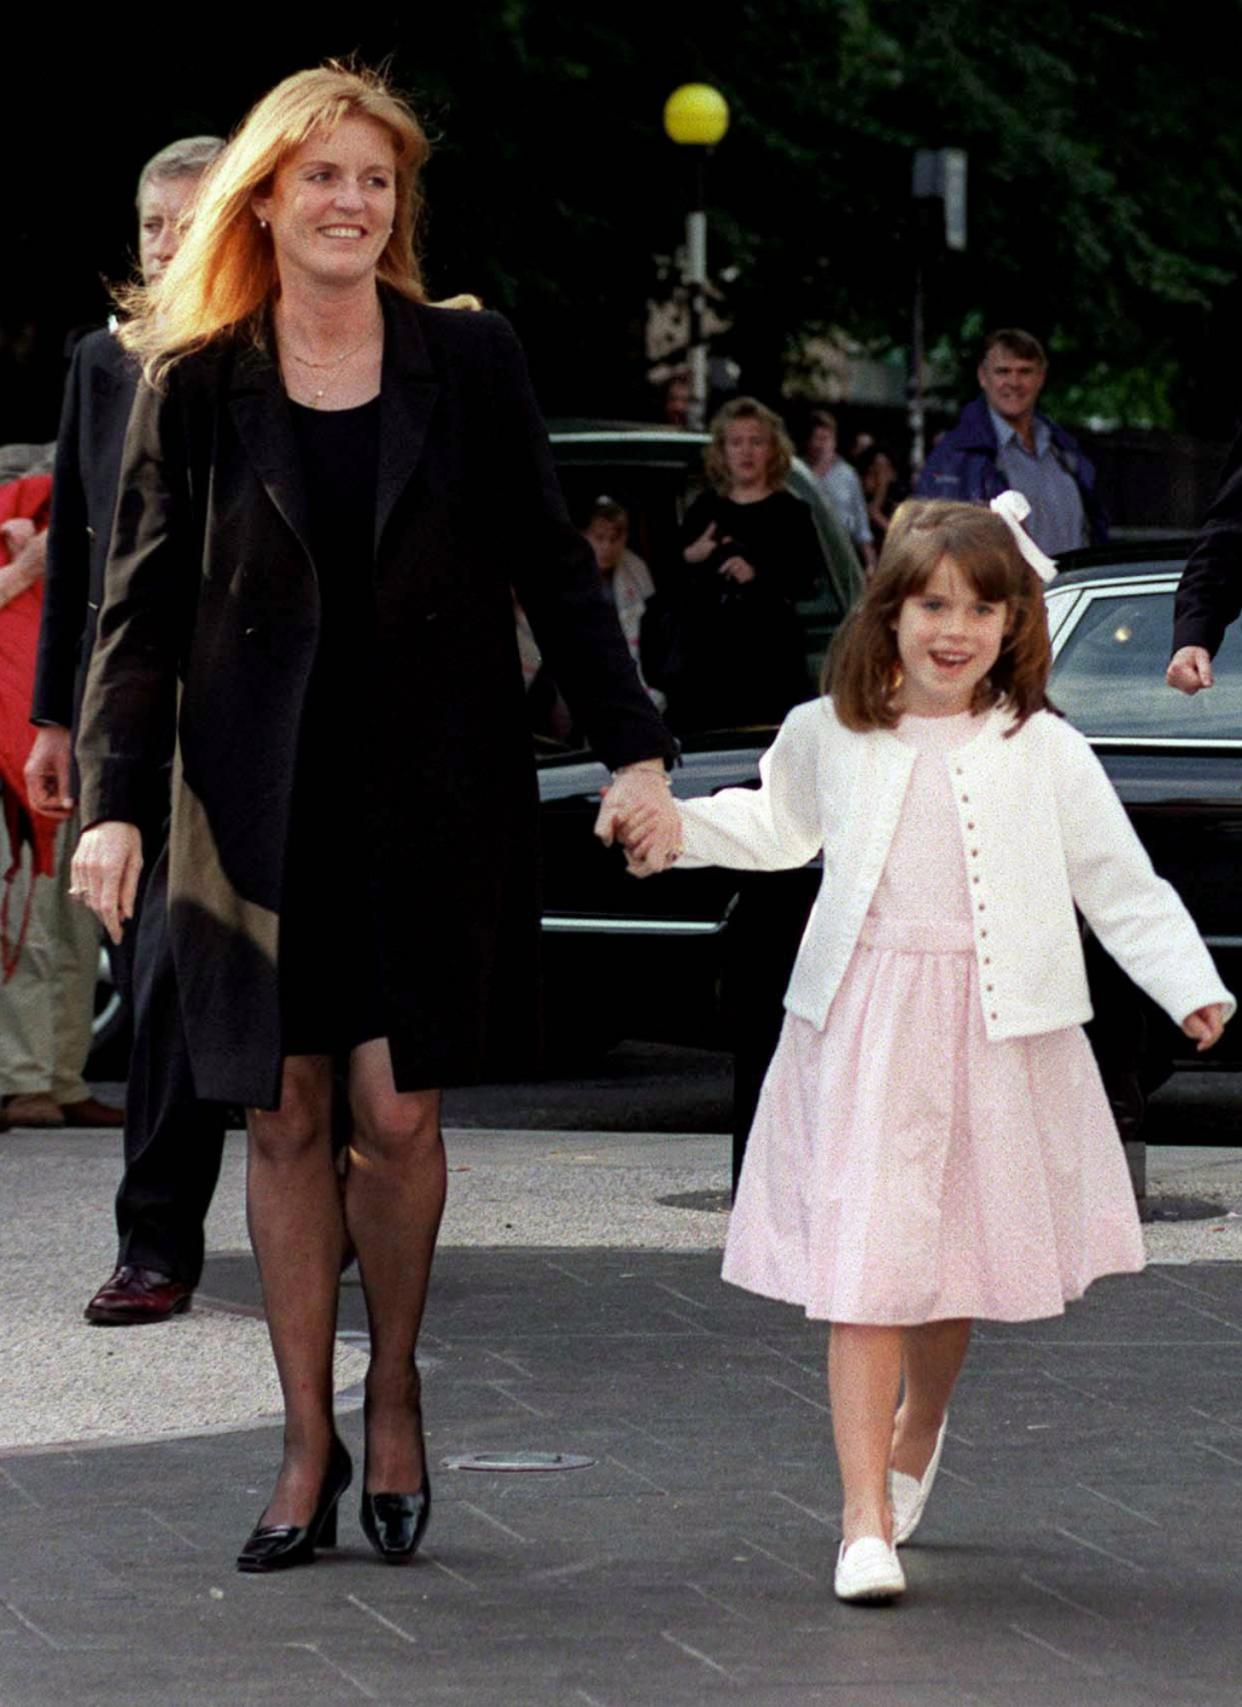 Princess Eugenie and her mum Sarah Ferguson (Fergie) say Eugenie’s name is like saying ‘Use Your Knees’ Source: Getty